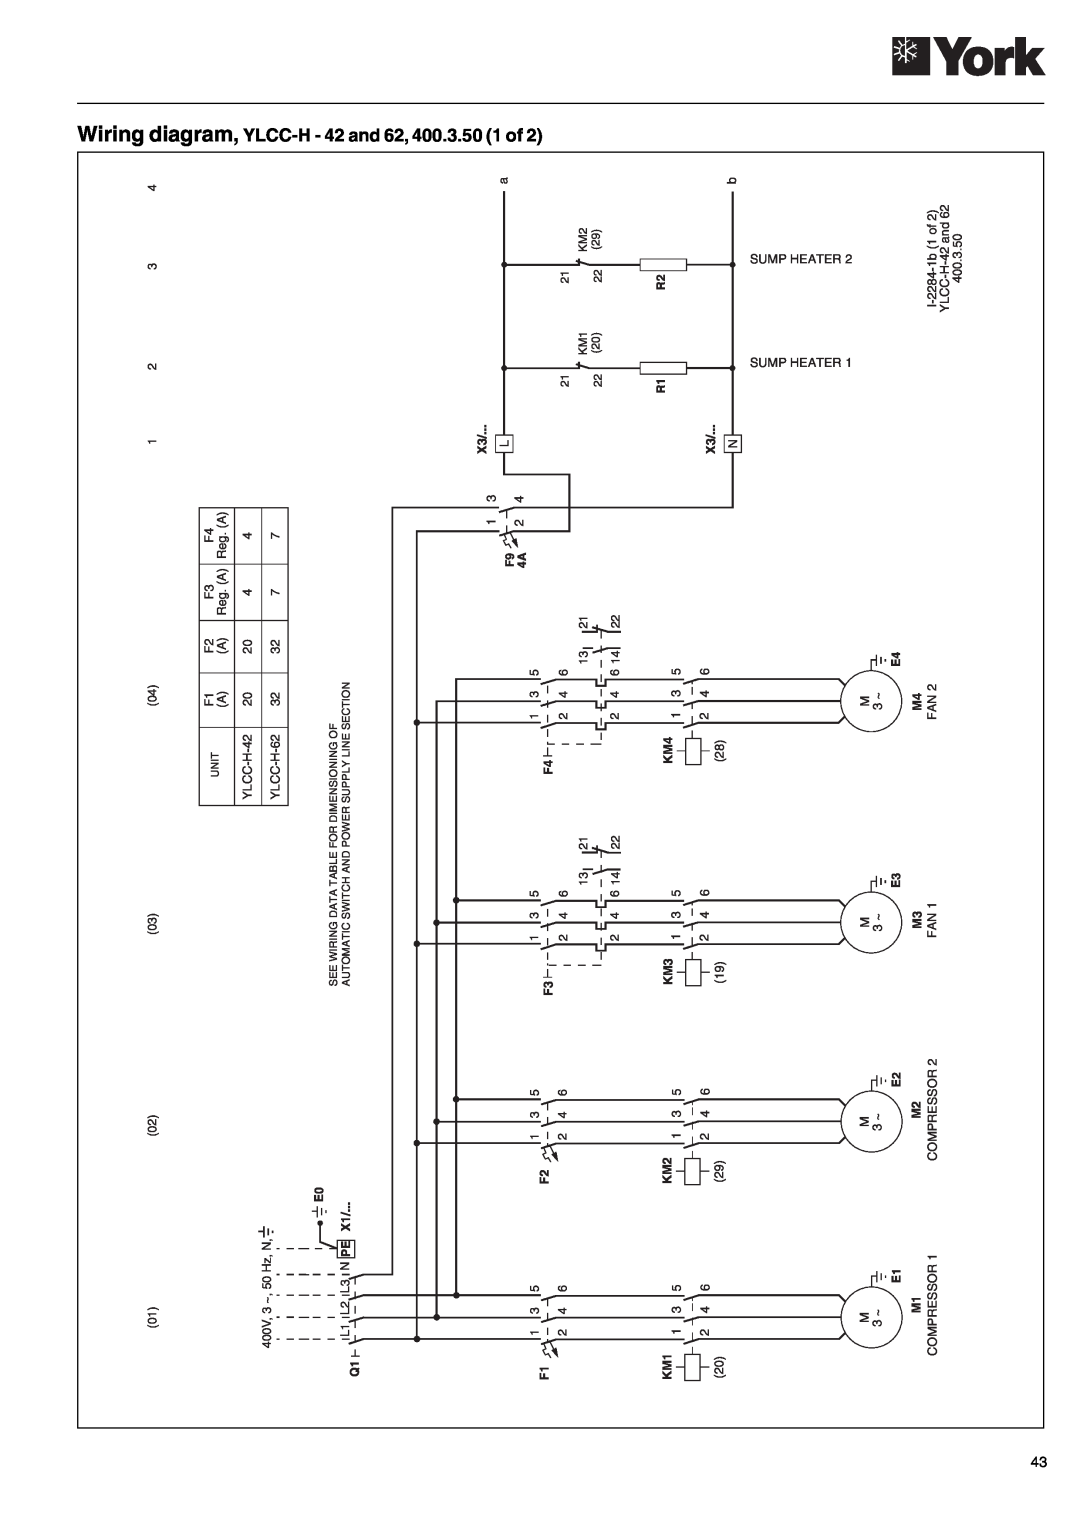 York 152, YLCC 42/62/82/102/112, YLCC-h, 122 manual Wiring diagram, YLCC-H- 42 and 62, 400.3.50 1 of 